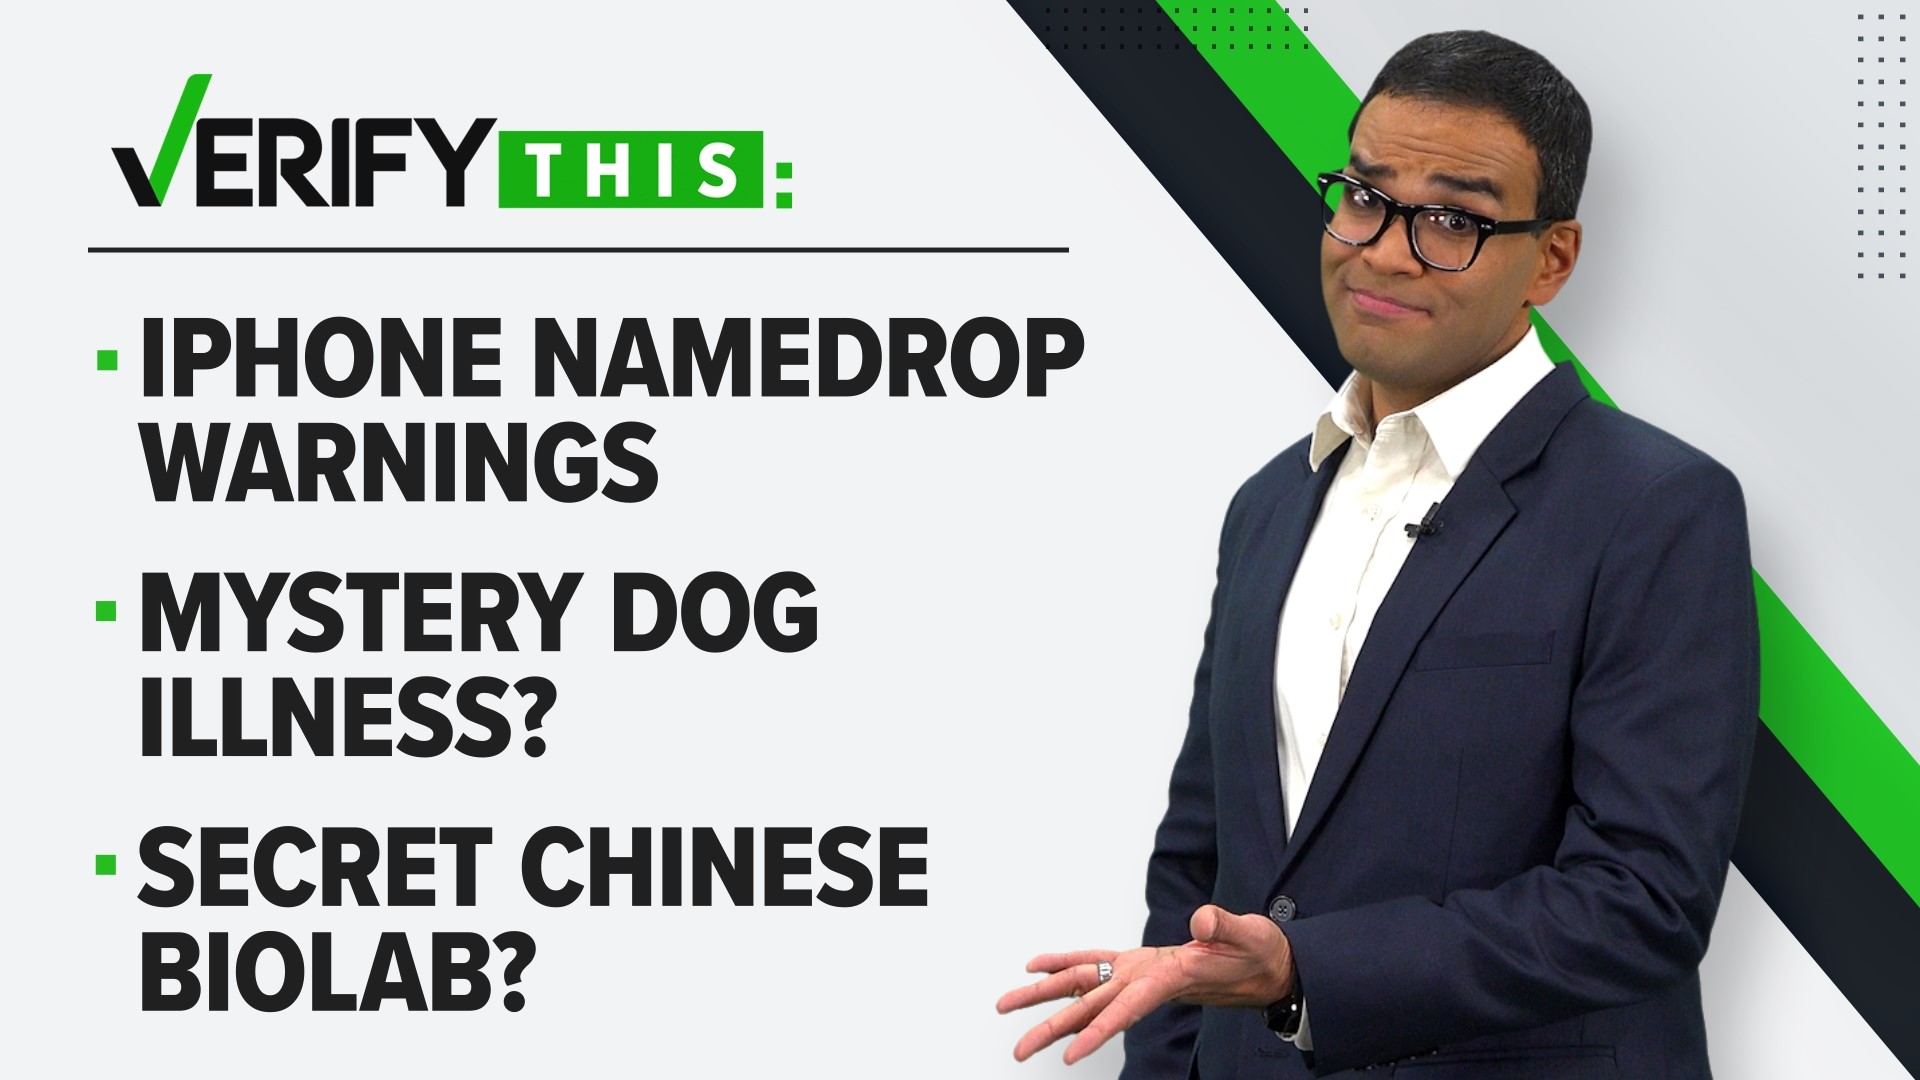 In this week’s episode, we look into claims of a mystery illness among dogs, verify if there’s a secret biolab in California and warnings about iPhone's NameDrop.